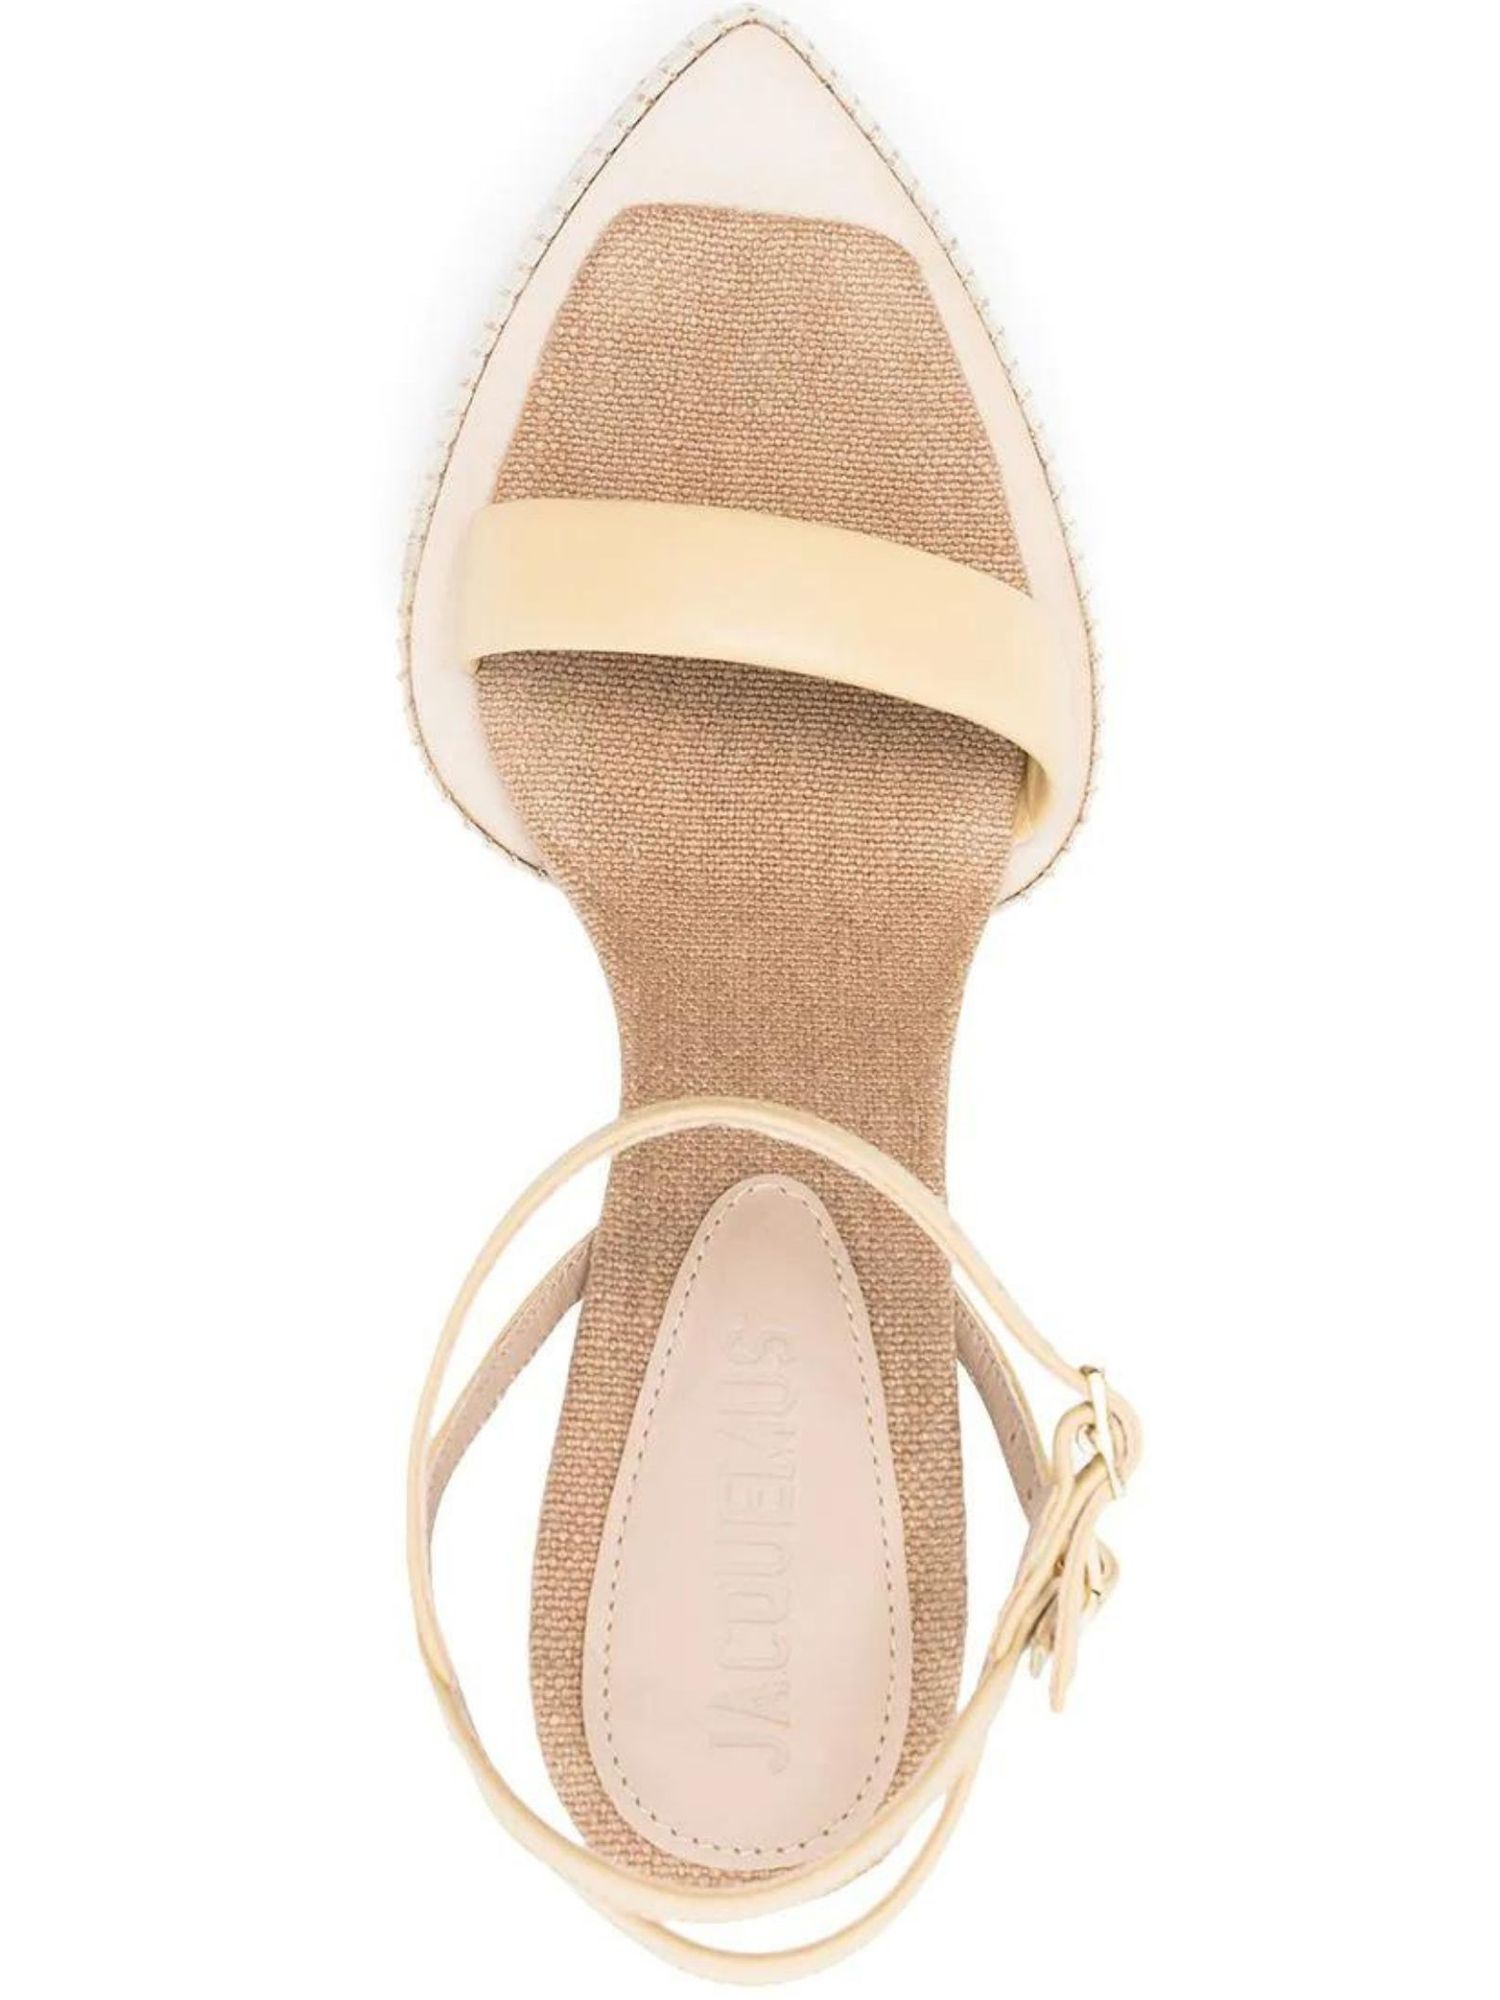 Jacquemus pointed-toe heeled sandals